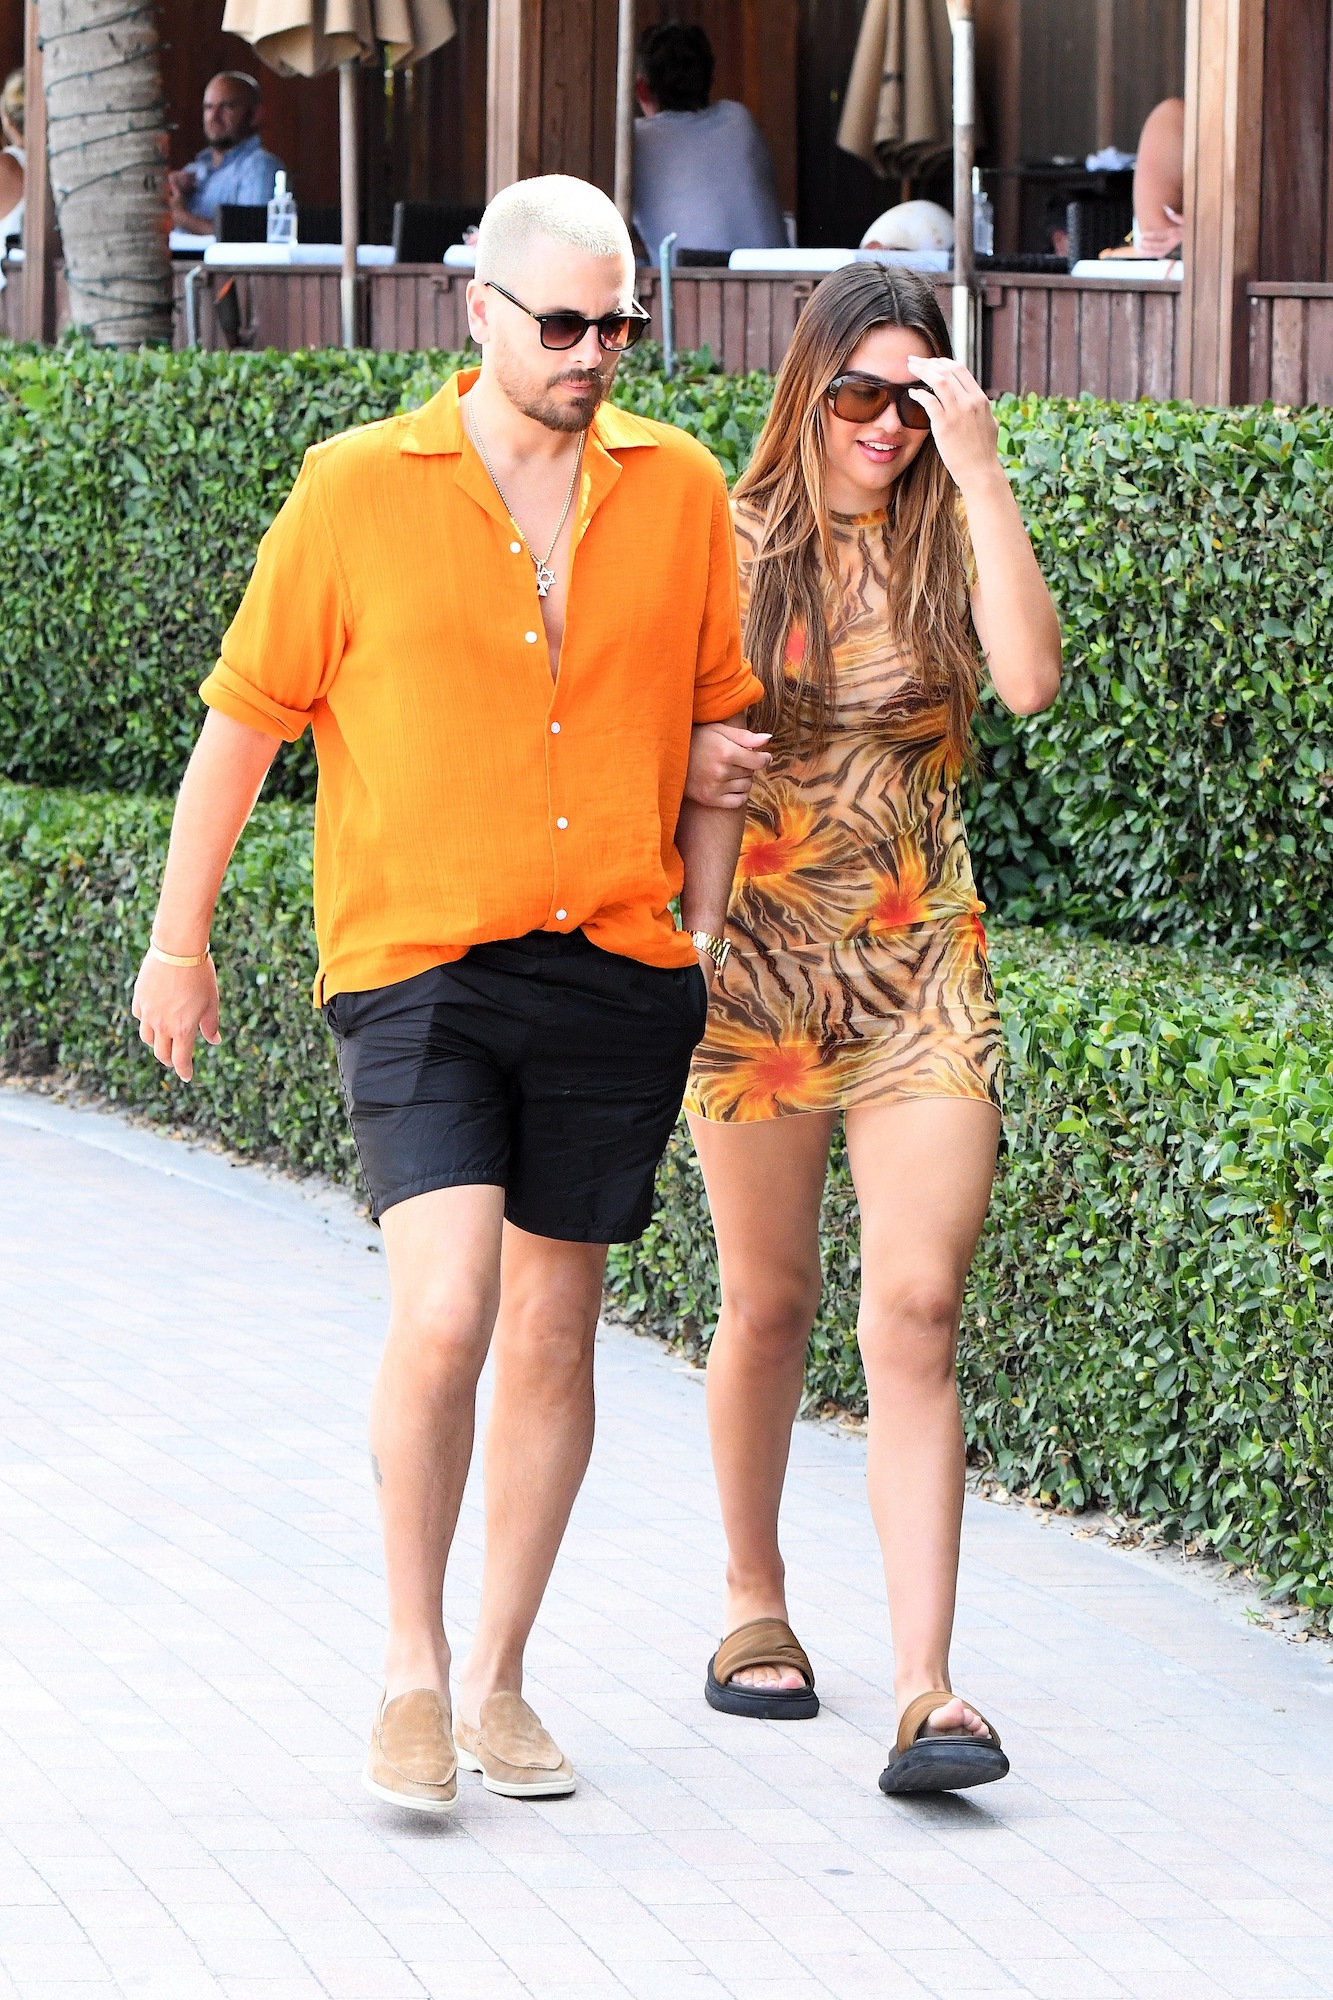 Scott Disick and Amelia Hamlin holding hands while walking on the beach in Miami